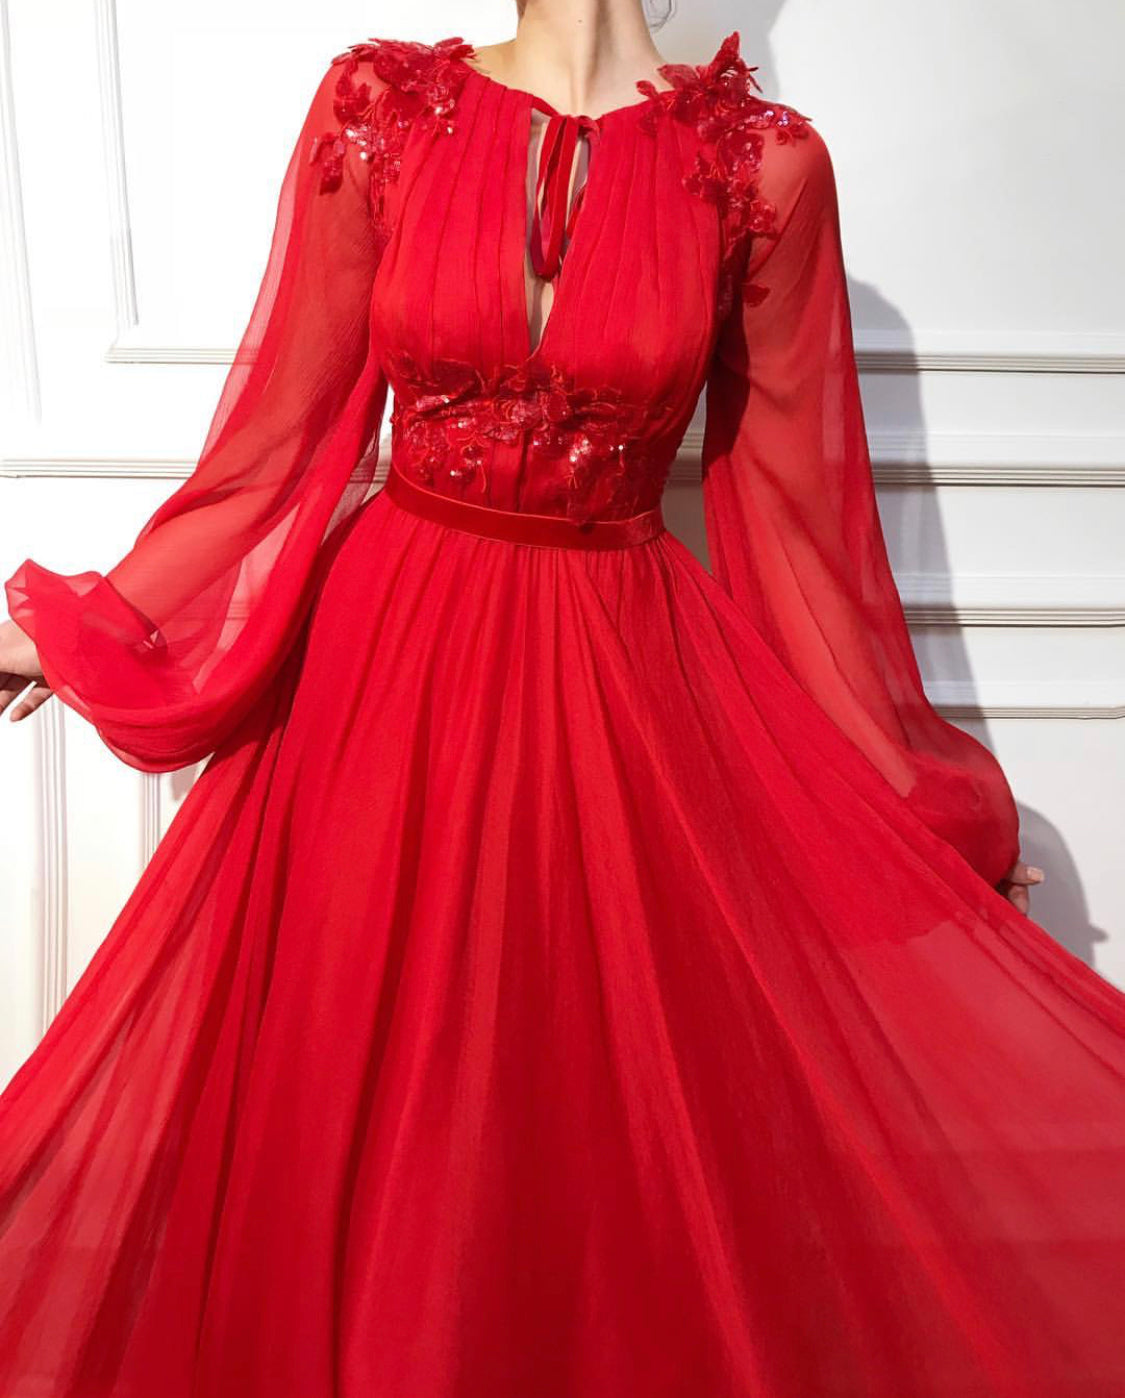 Red A-Line dress with long sleeves and embroidery